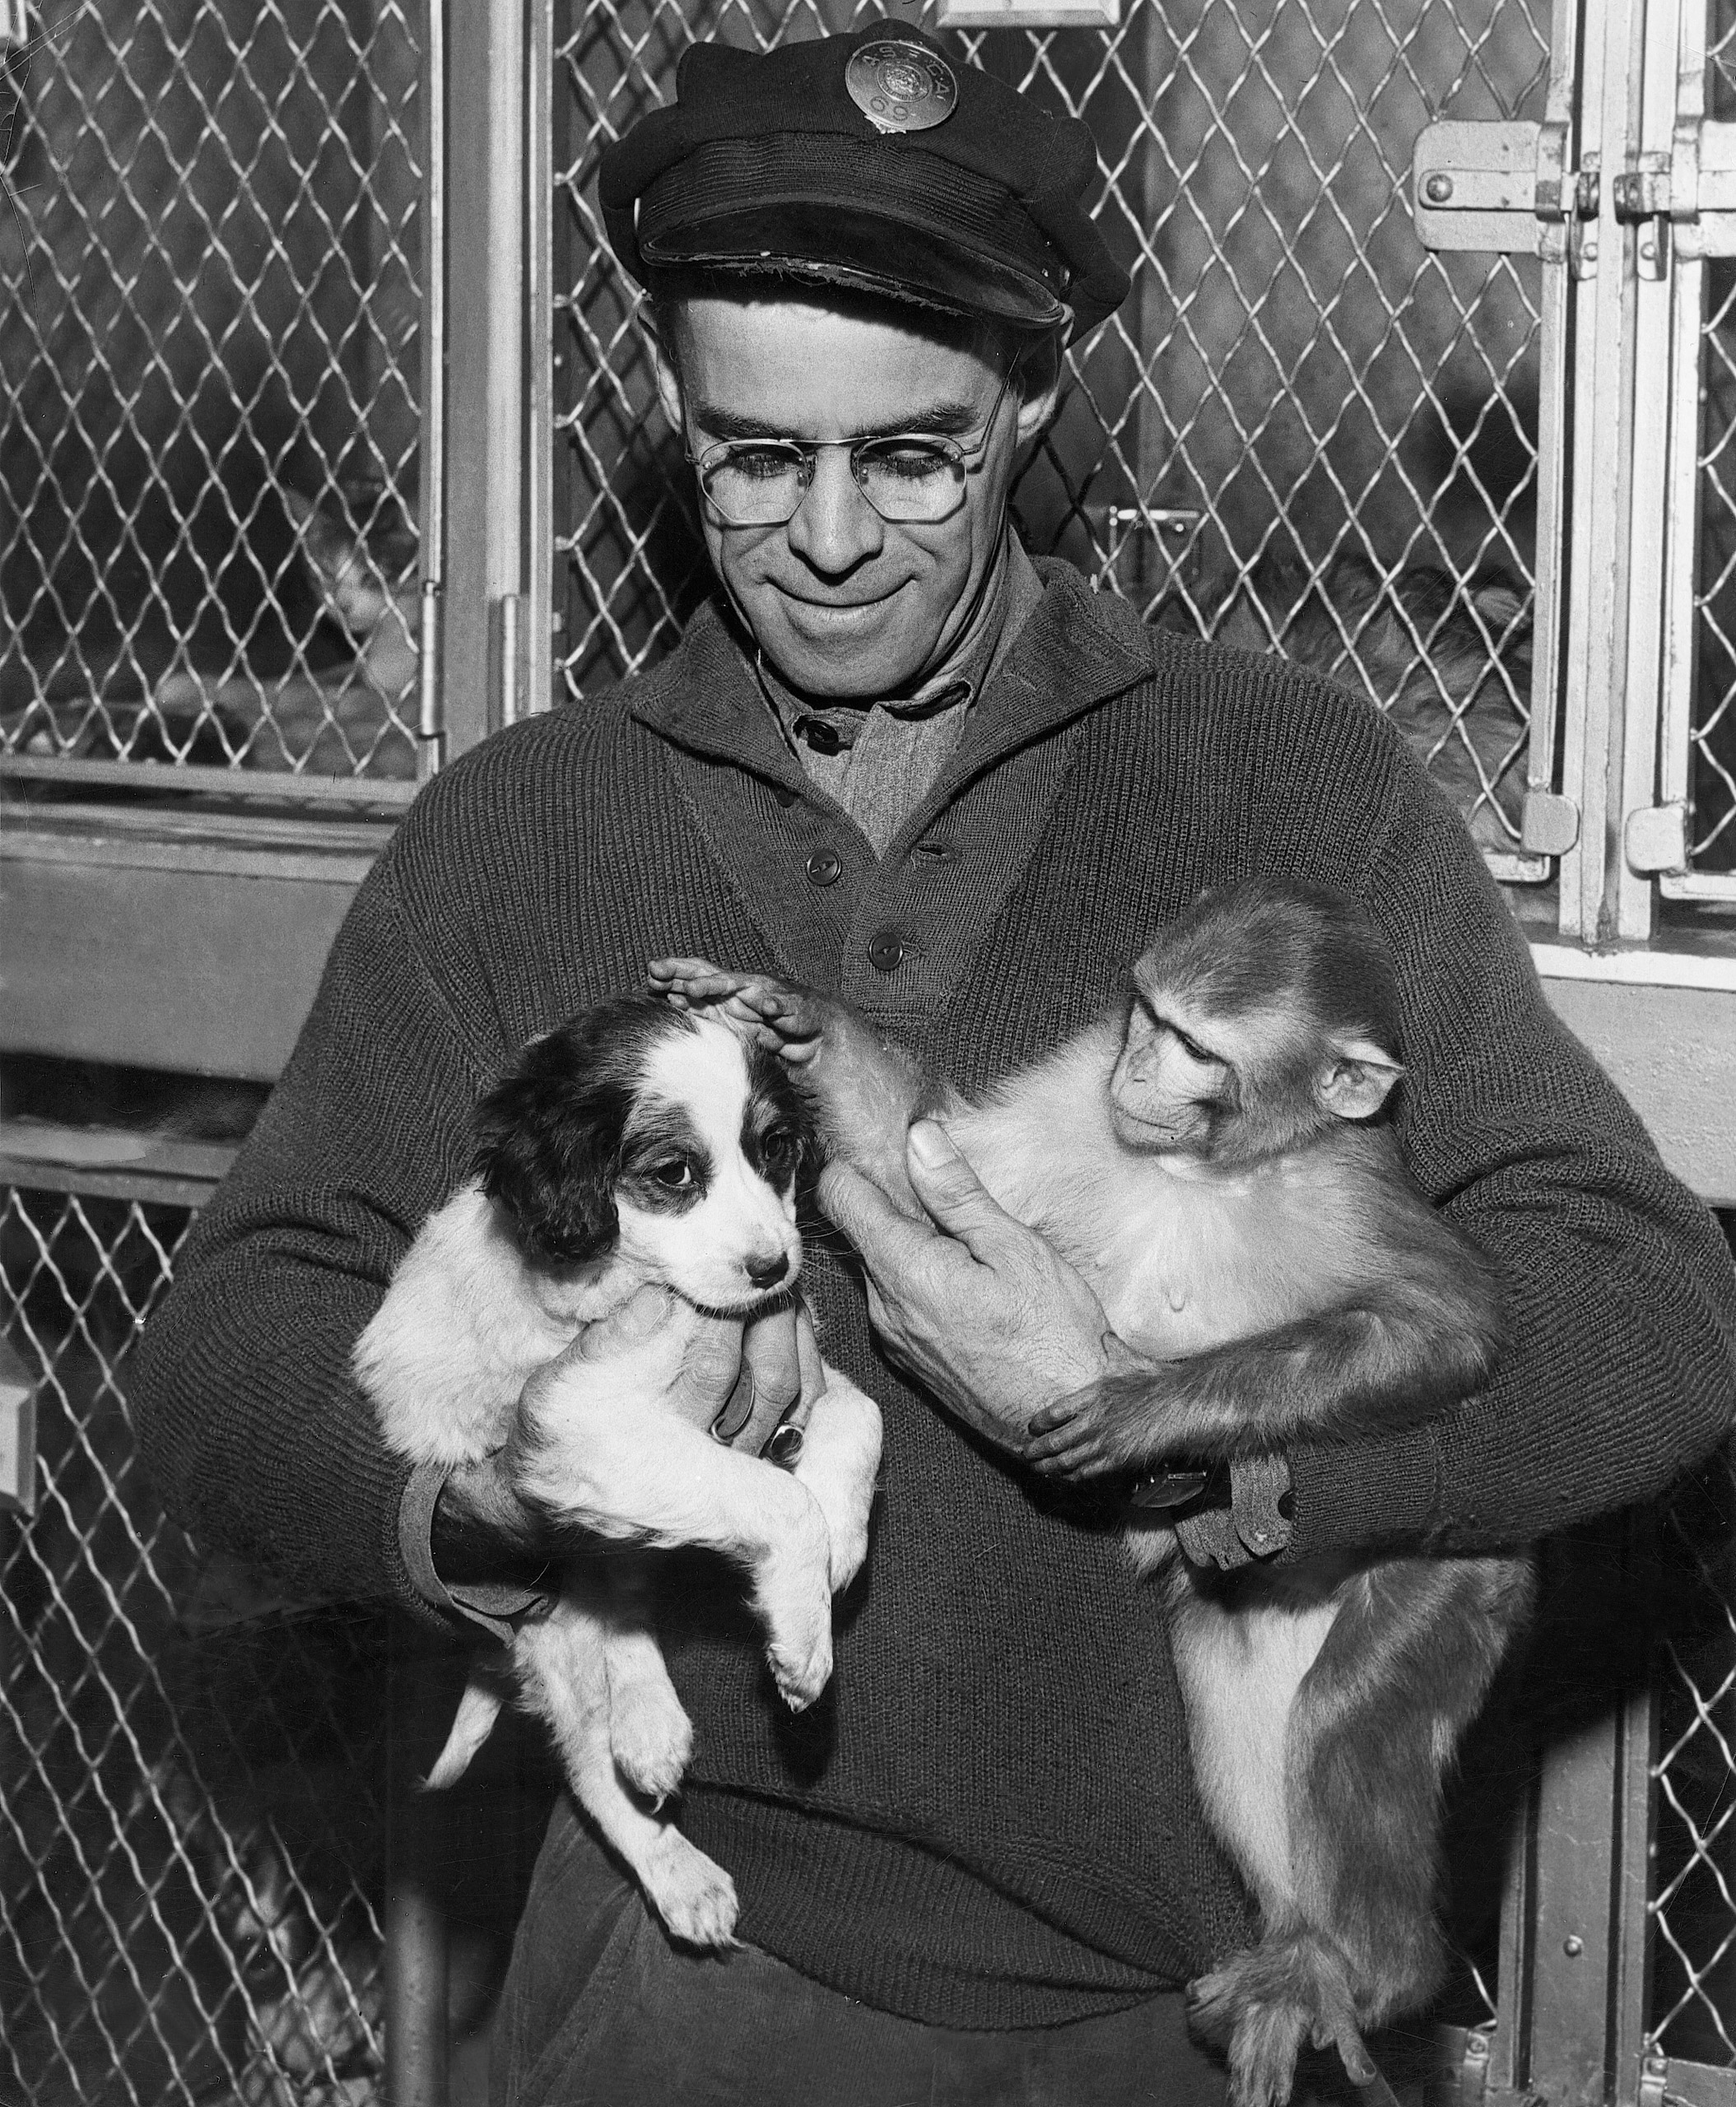 ASPCA agent cares for dog and monkey at the ASPCA Animal Port at Idlewild (John F. Kennedy) Airport, 1960s